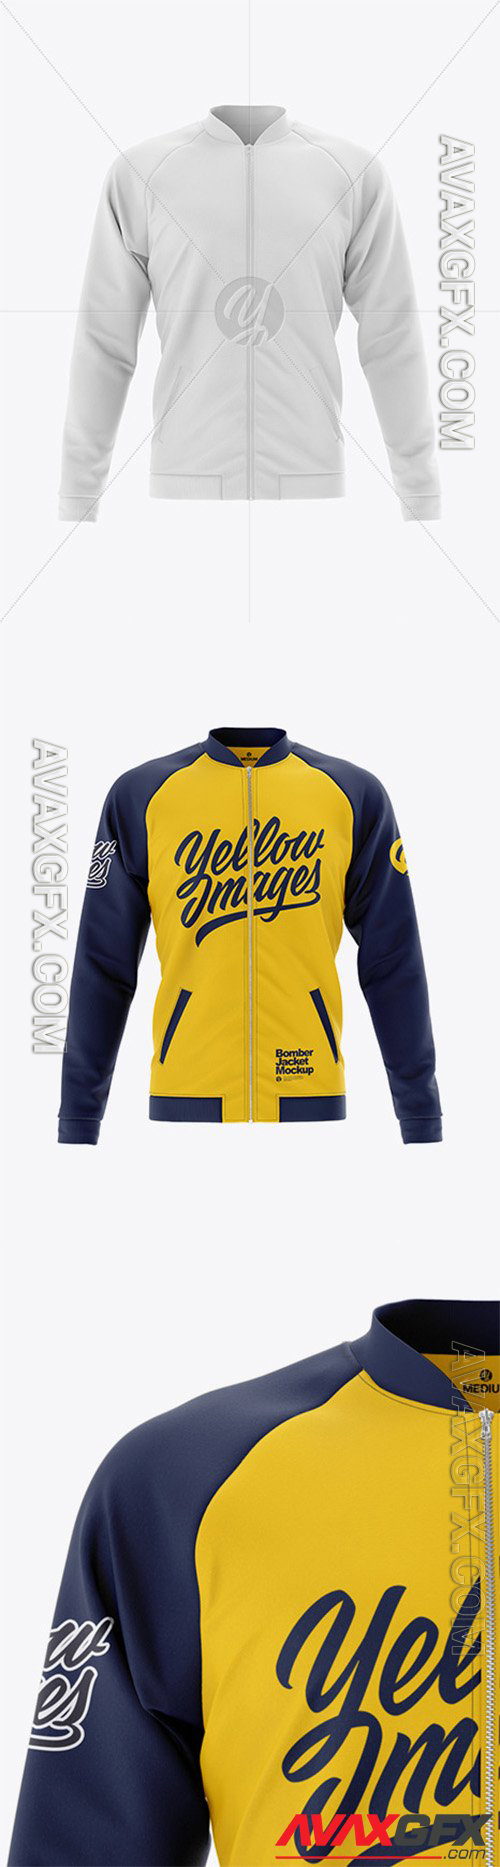 Download Men S Varsity Jacket Mockup Front View Baseball Bomber Jacket 59840 Avaxgfx All Downloads That You Need In One Place Graphic From Nitroflare Rapidgator PSD Mockup Templates